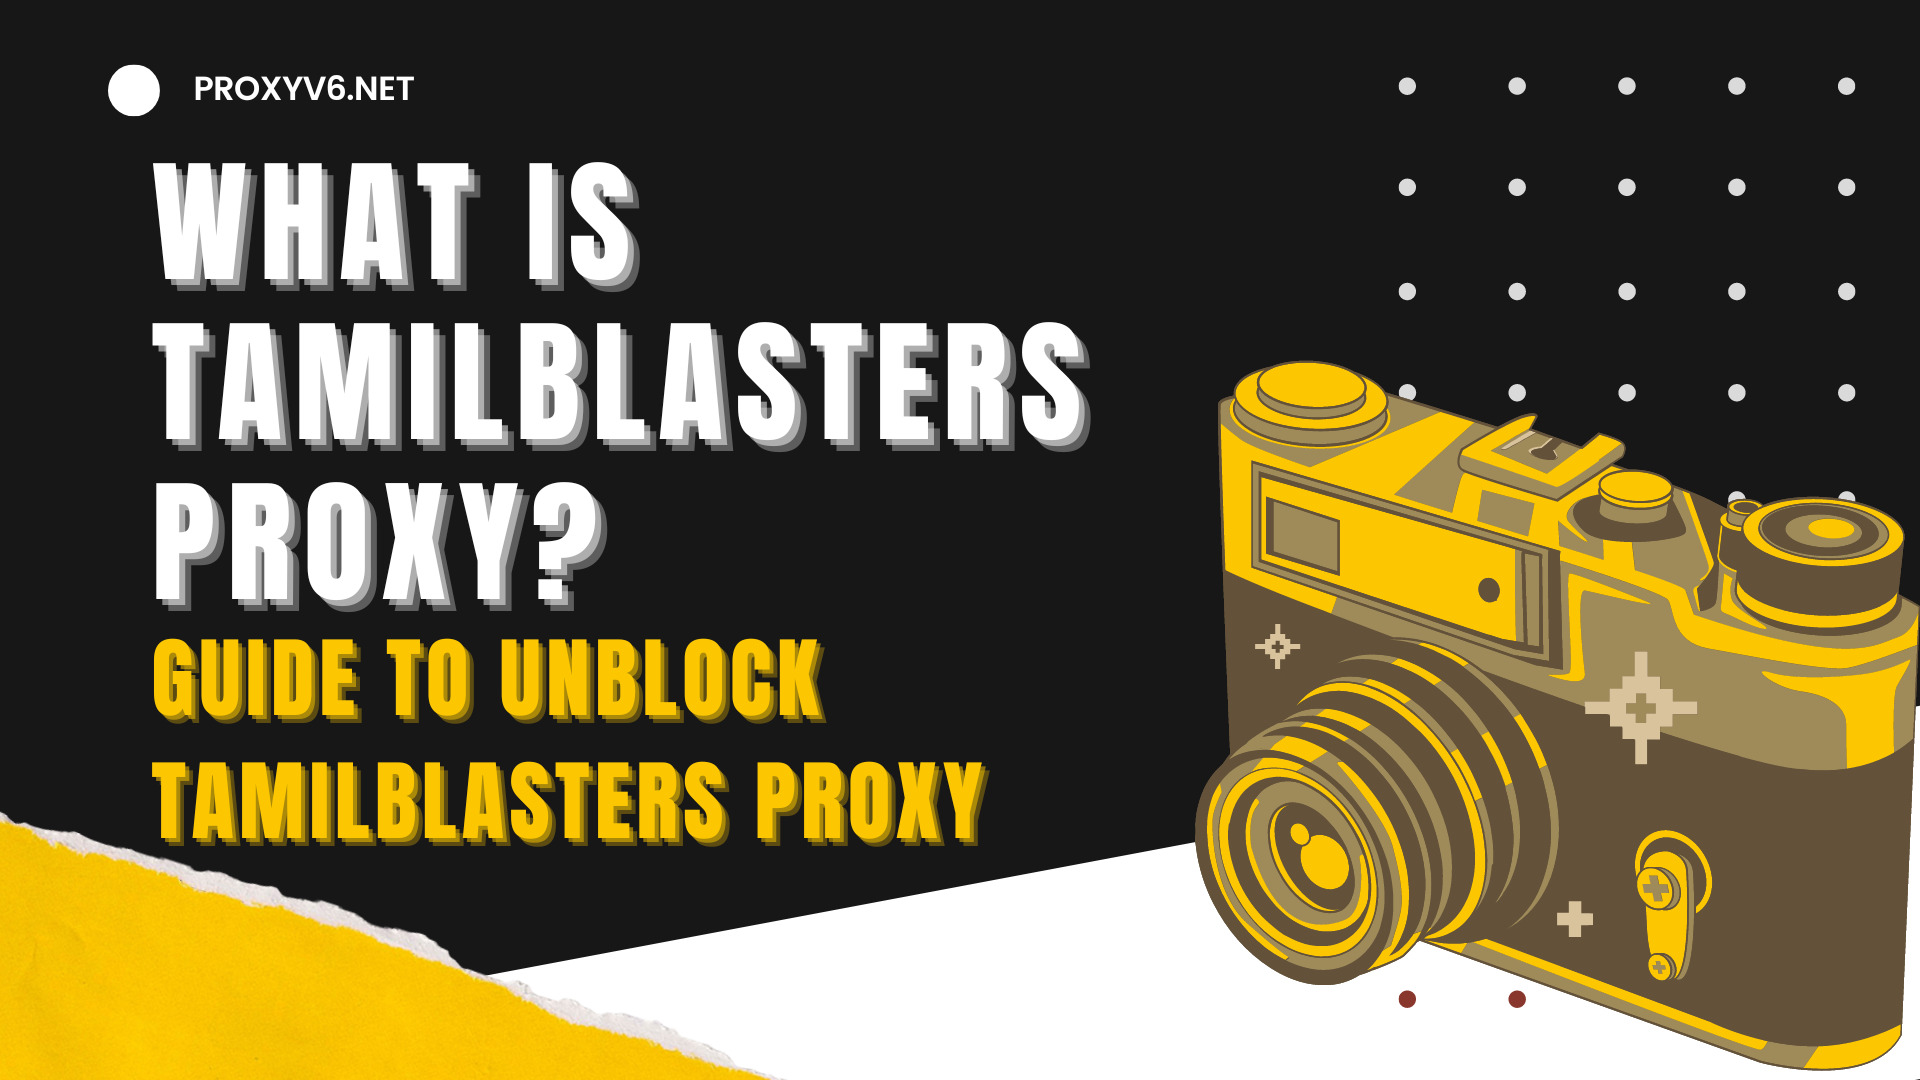 What is Tamilblasters Proxy? Guide to unblock Tamilblasters Proxy